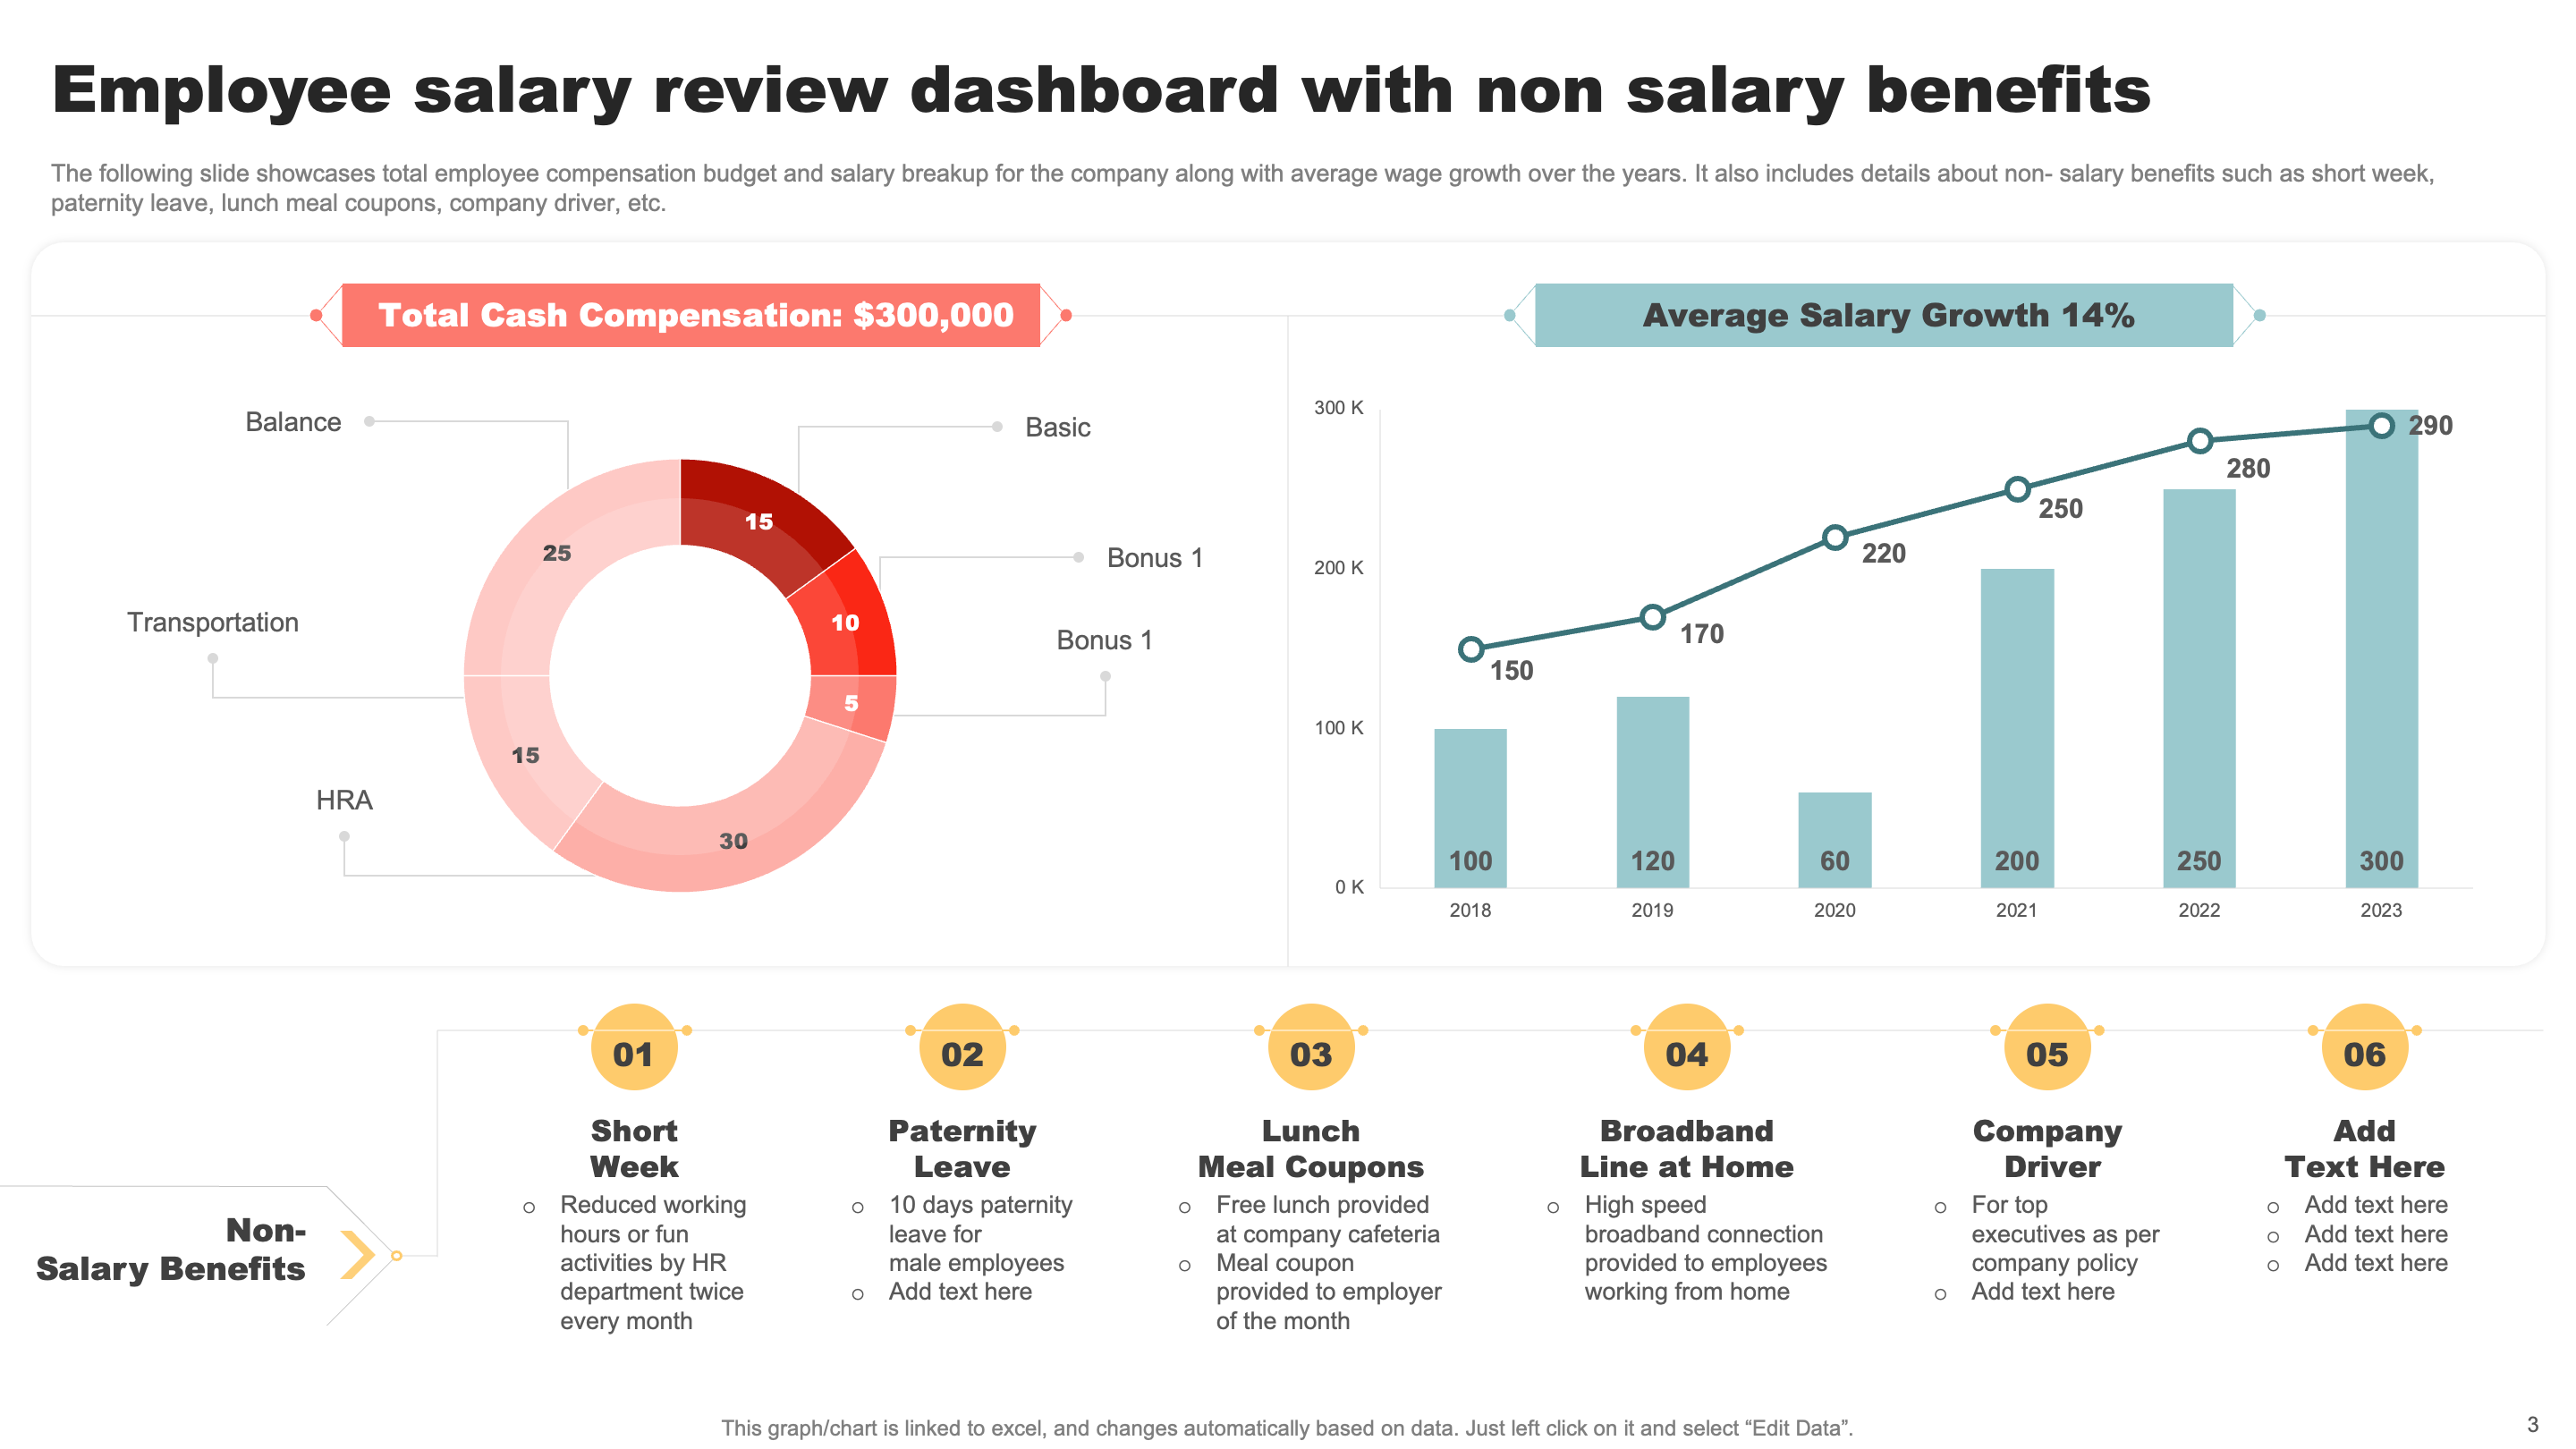 Employee Salary Review Dashboard with Non-Salary Benefits